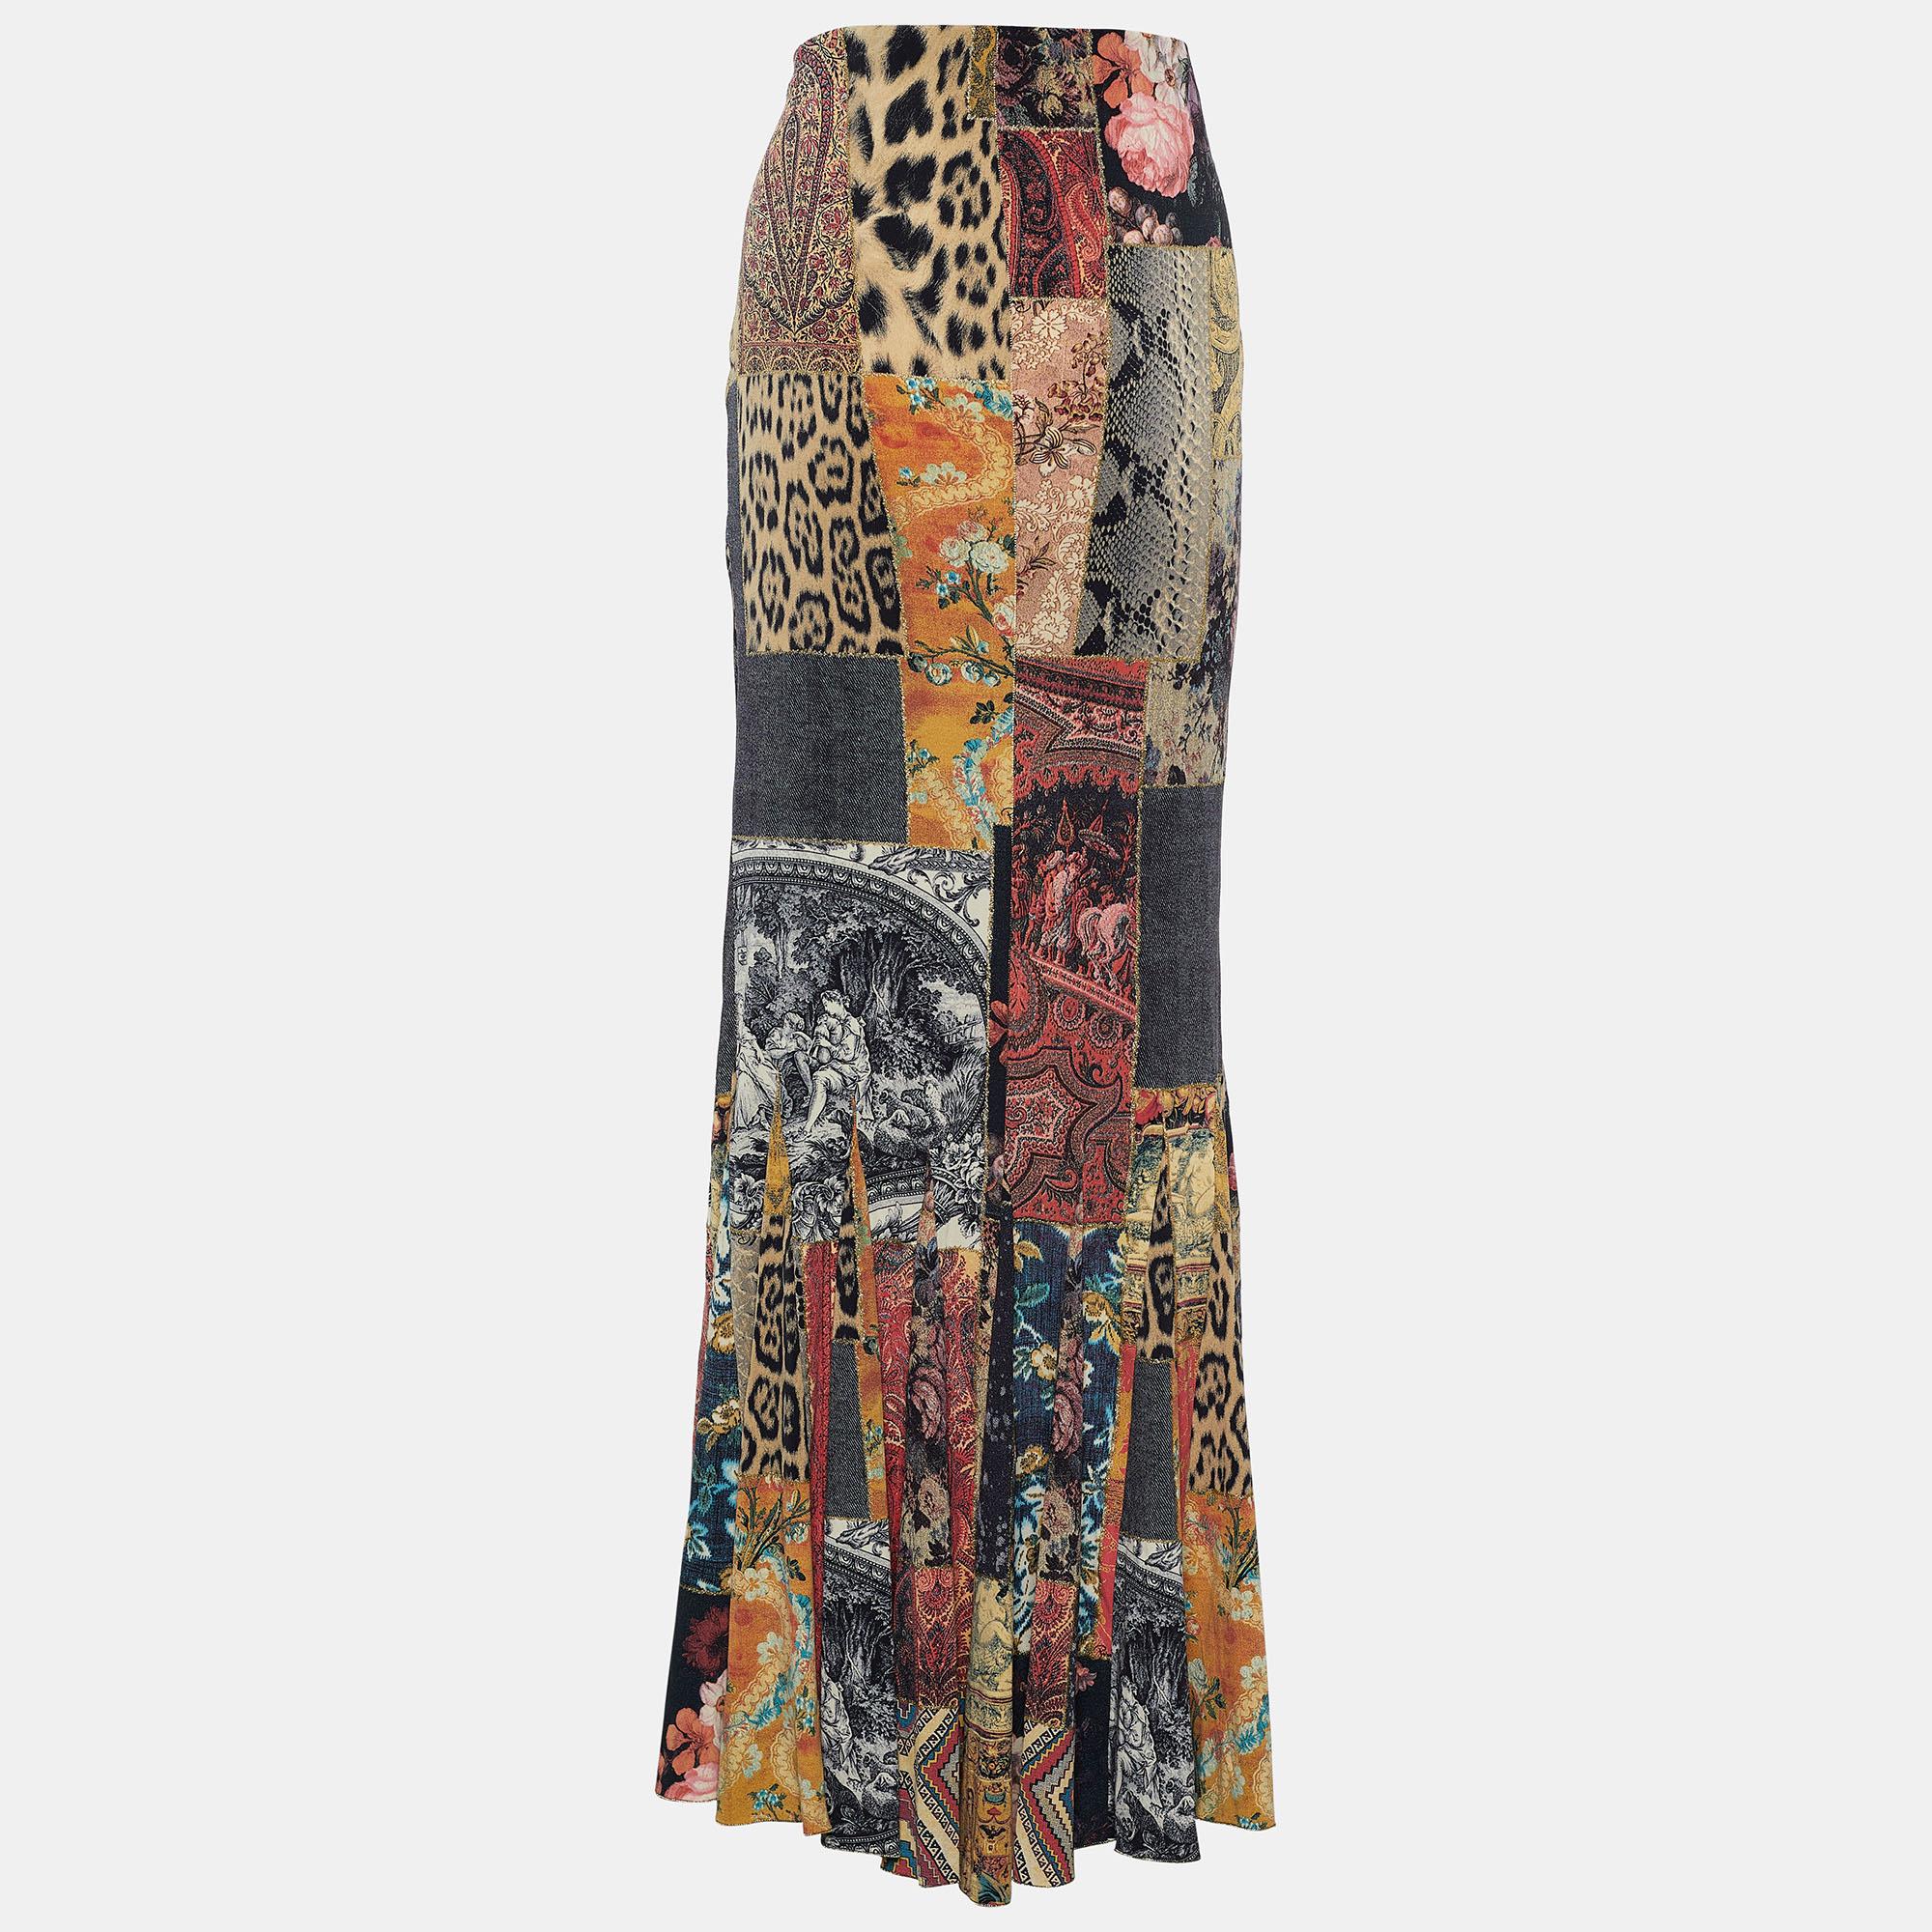 This Roberto Cavalli skirt will beautifully illustrate your figure. Created from a mix of quality materials, it is made striking with a chic multicolor design and has pleat detailing at the lower part. Pair it with a solid top and minimal jewelry